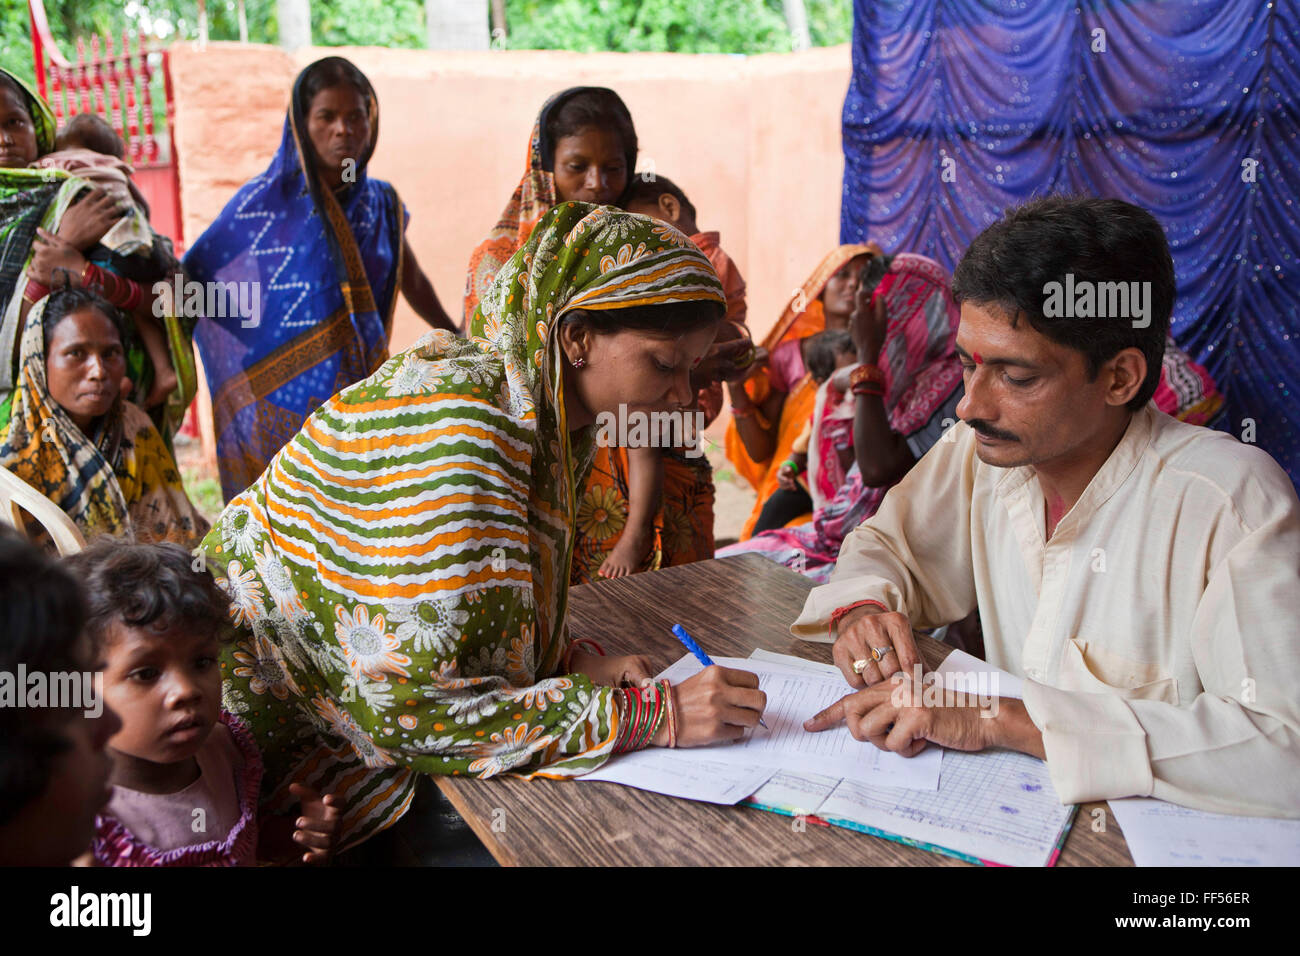 Families from a rural slum in the Orissa district of India get legal advice and birth certificates from a Legal Aid Clinic run by the organisation CLAP. Committee for Legal Aid to Poor (CLAP) is a non-profit organisation helping to provide legal aid to the poorer communities in the Orissa district of India. Stock Photo